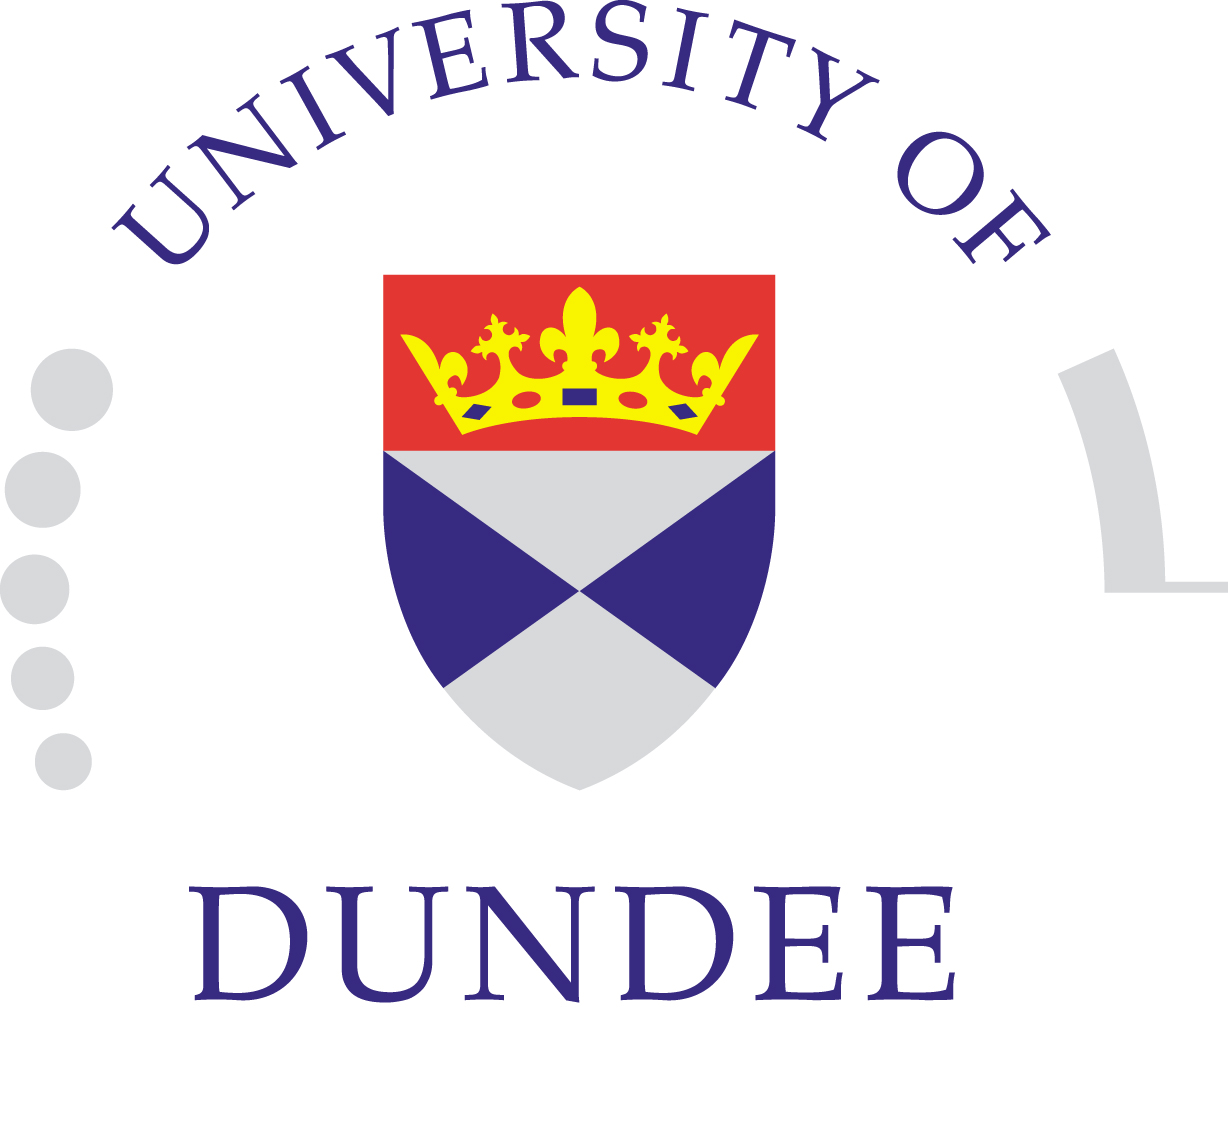 phd scholarships in scotland for international students